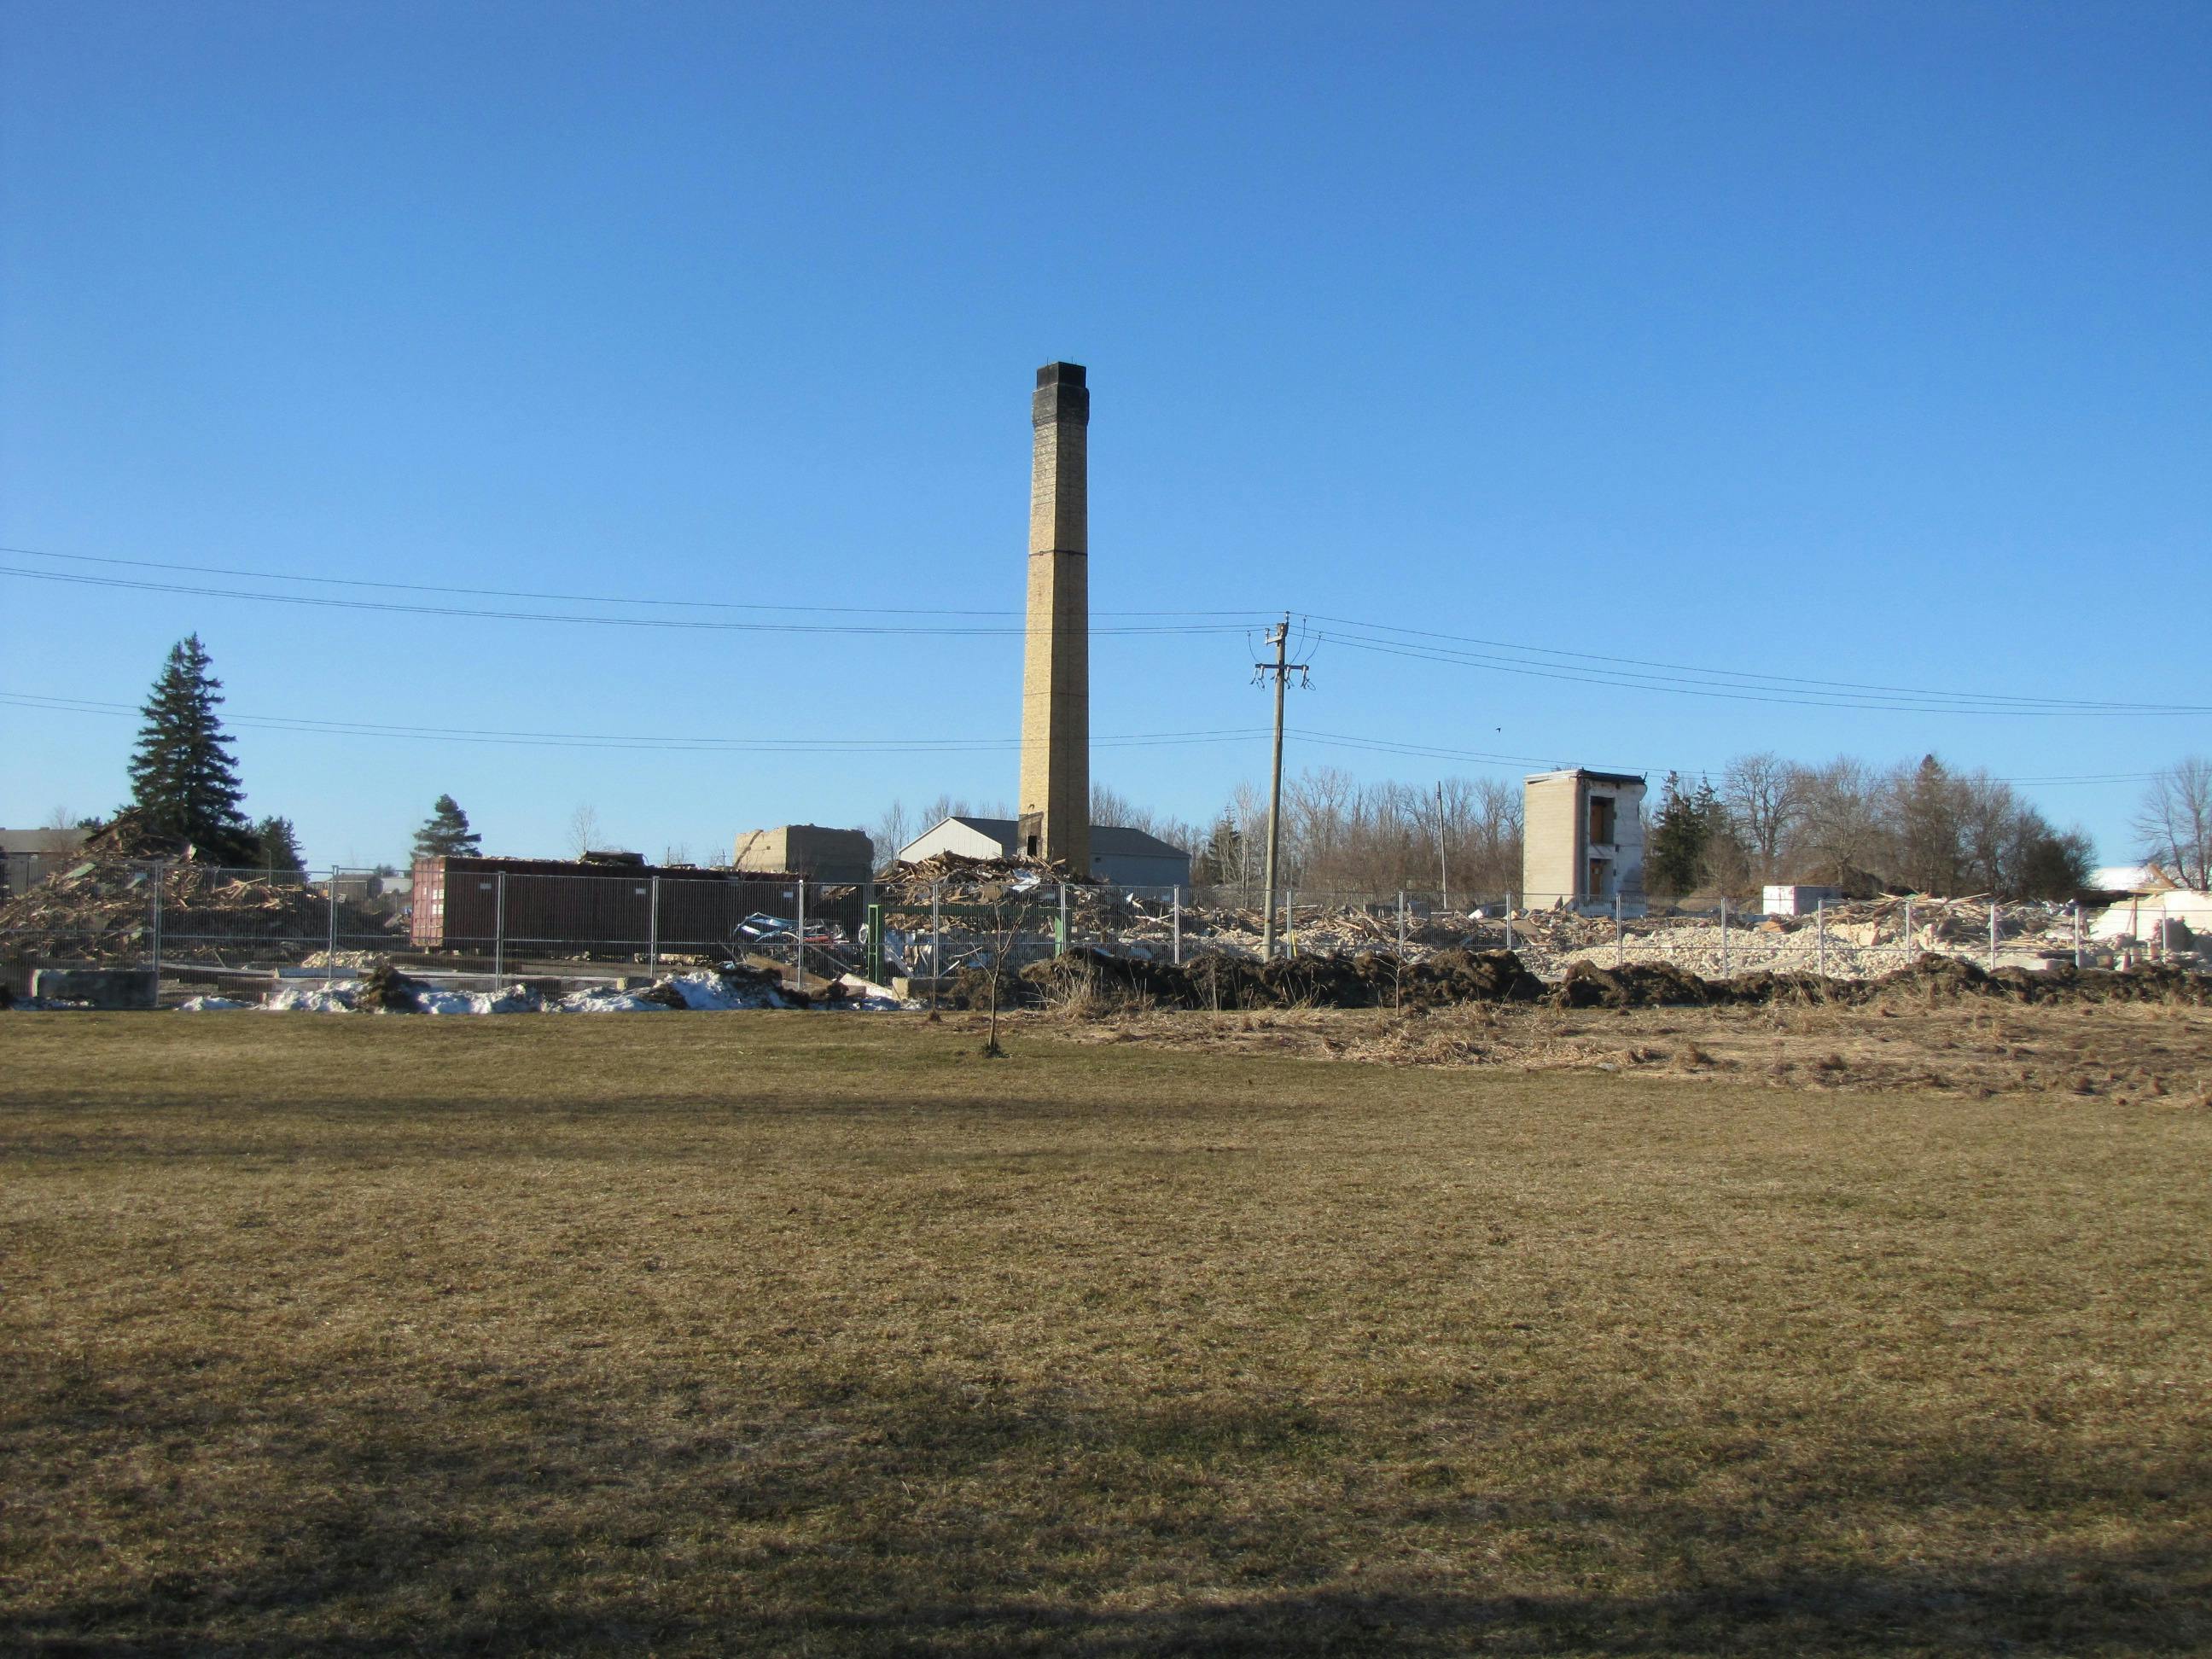 Demolition of Bogdon and Gross - March 19, 2021